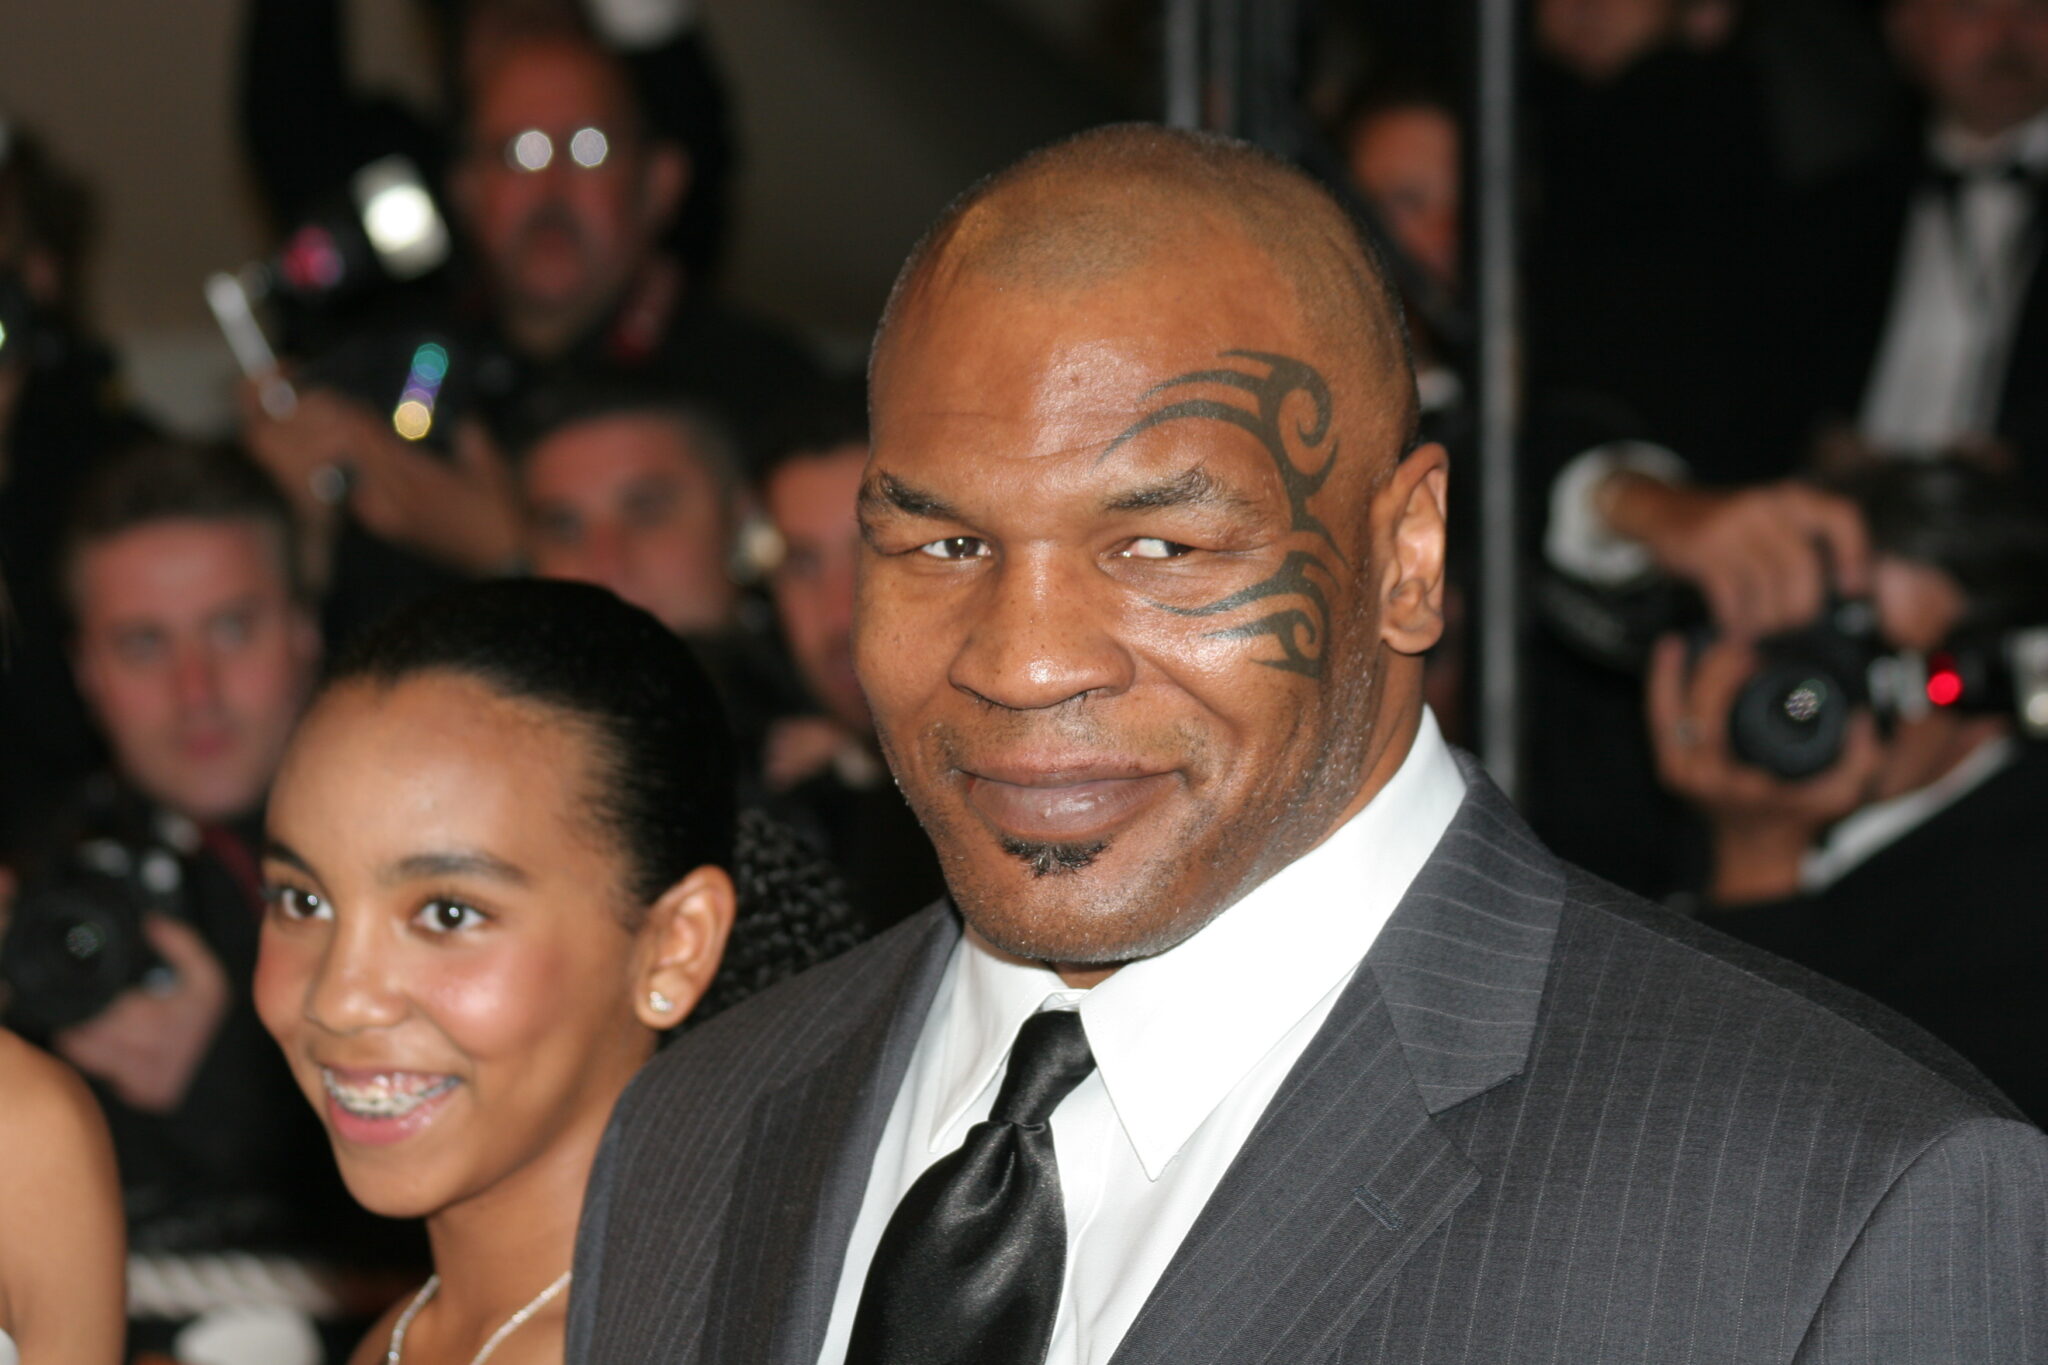 Mike Tyson is photographed at an event with lots of people in the background